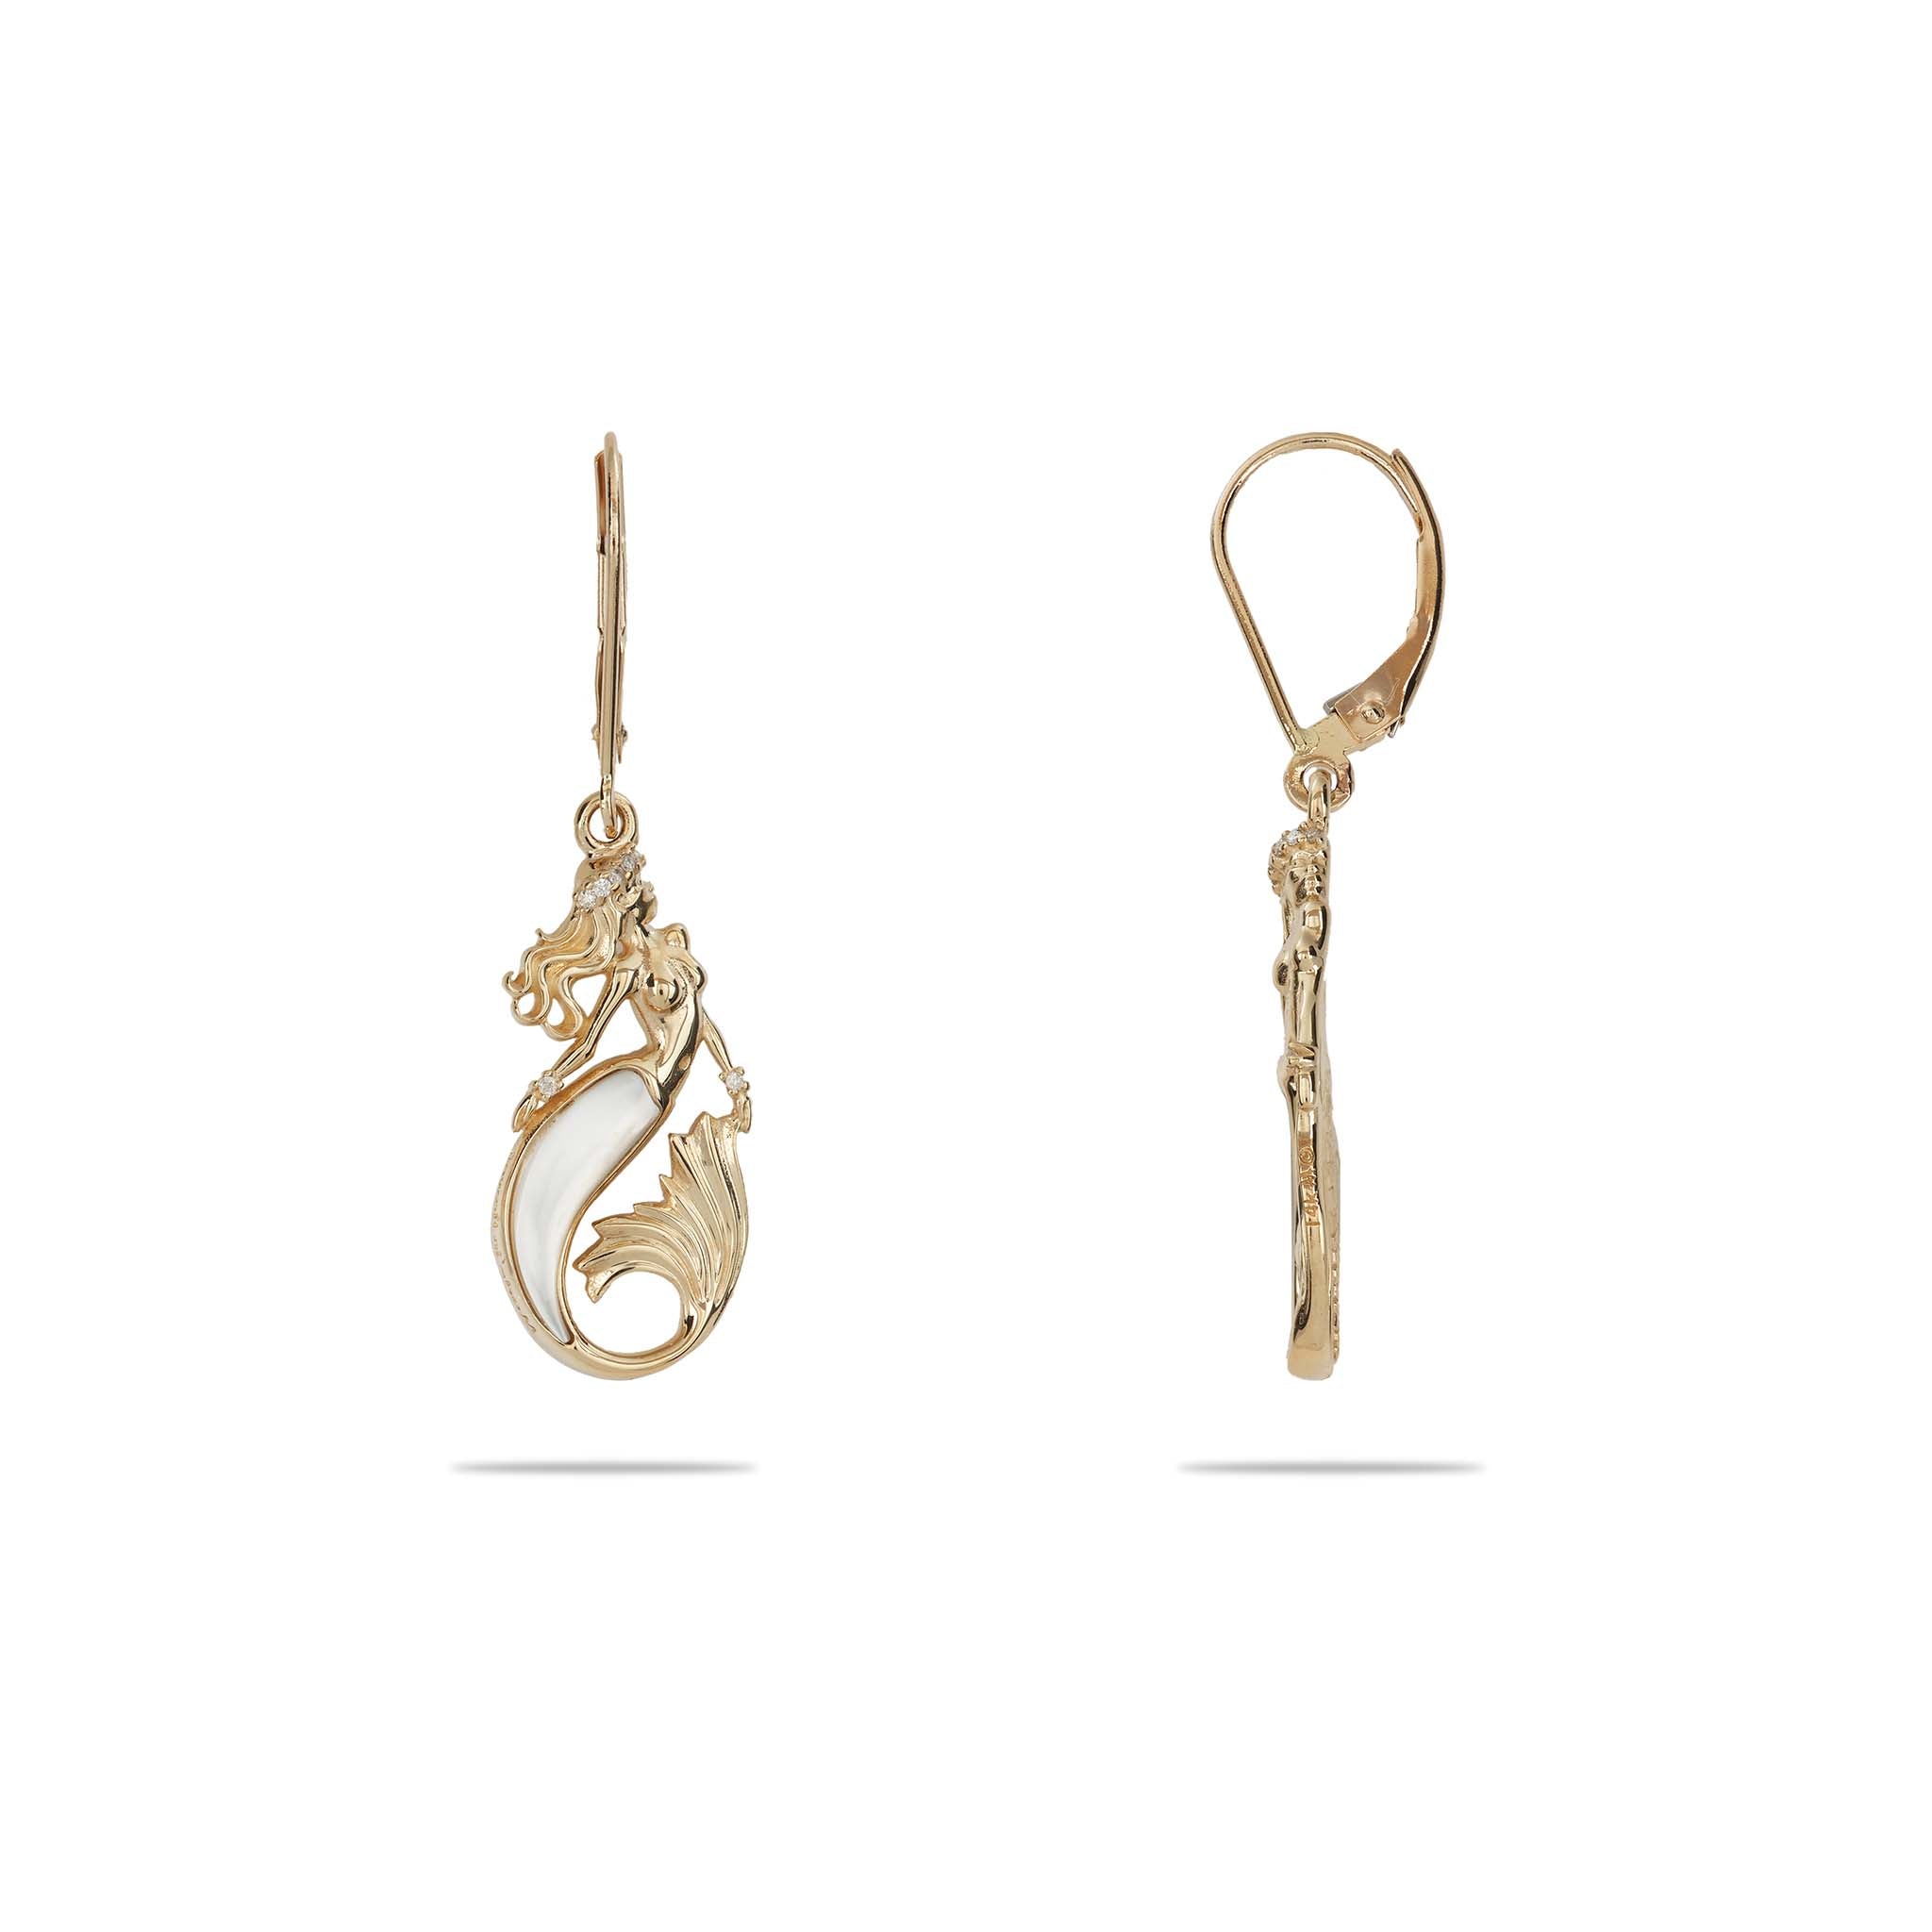 Sealife Mermaid Mother of Pearl Earrings in Gold with Diamonds - 24mm